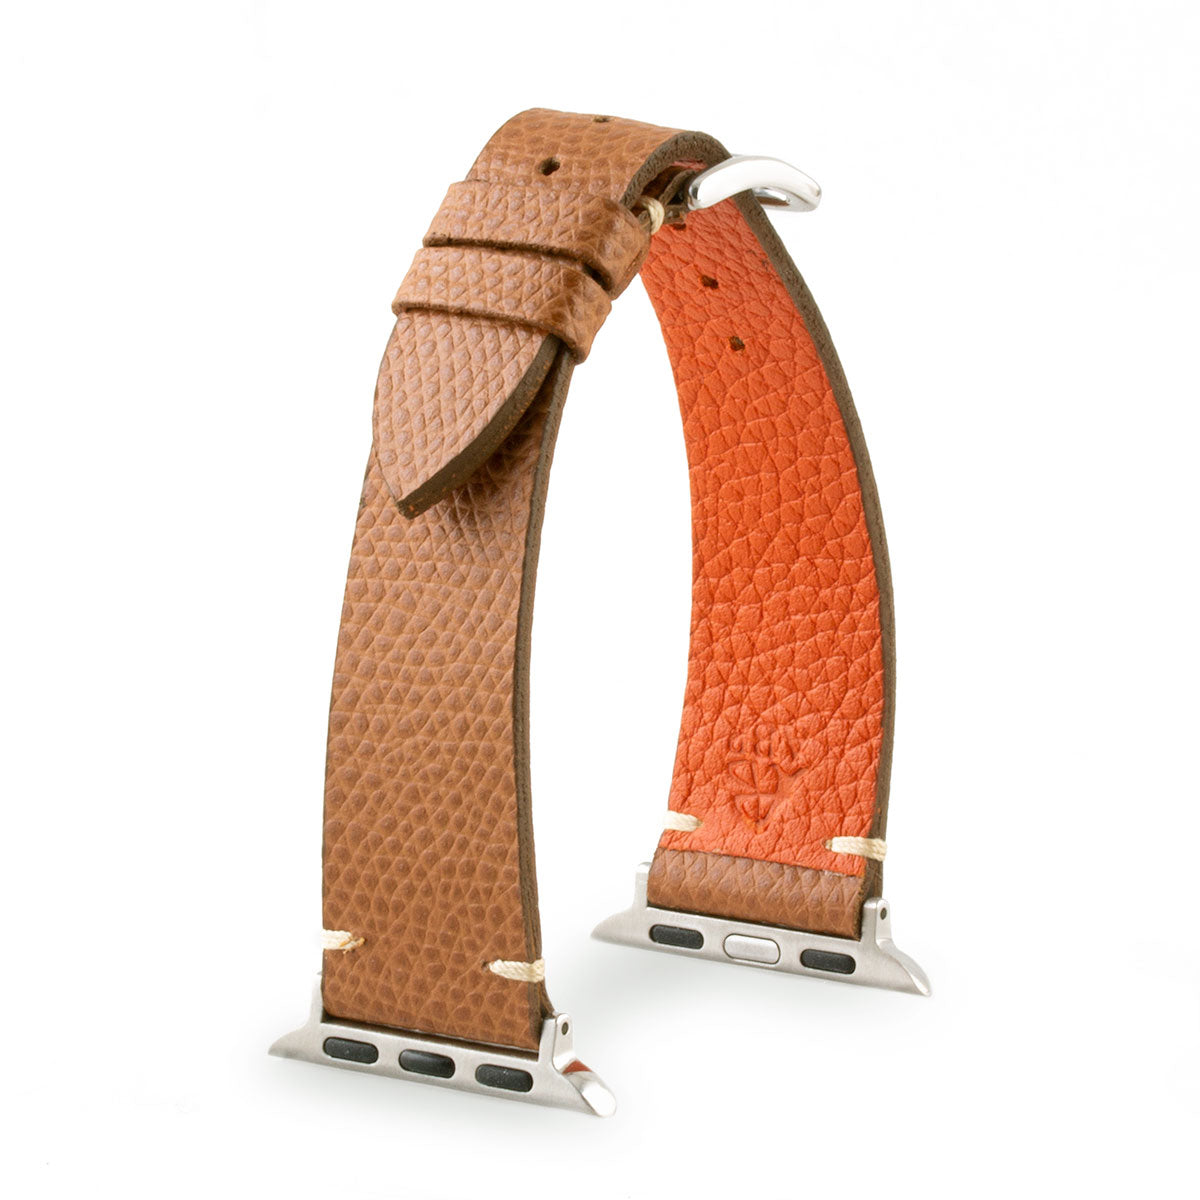 Apple Watch strap 42/44/45 mm, Calf leather, Gold – VELANTE Officiale®